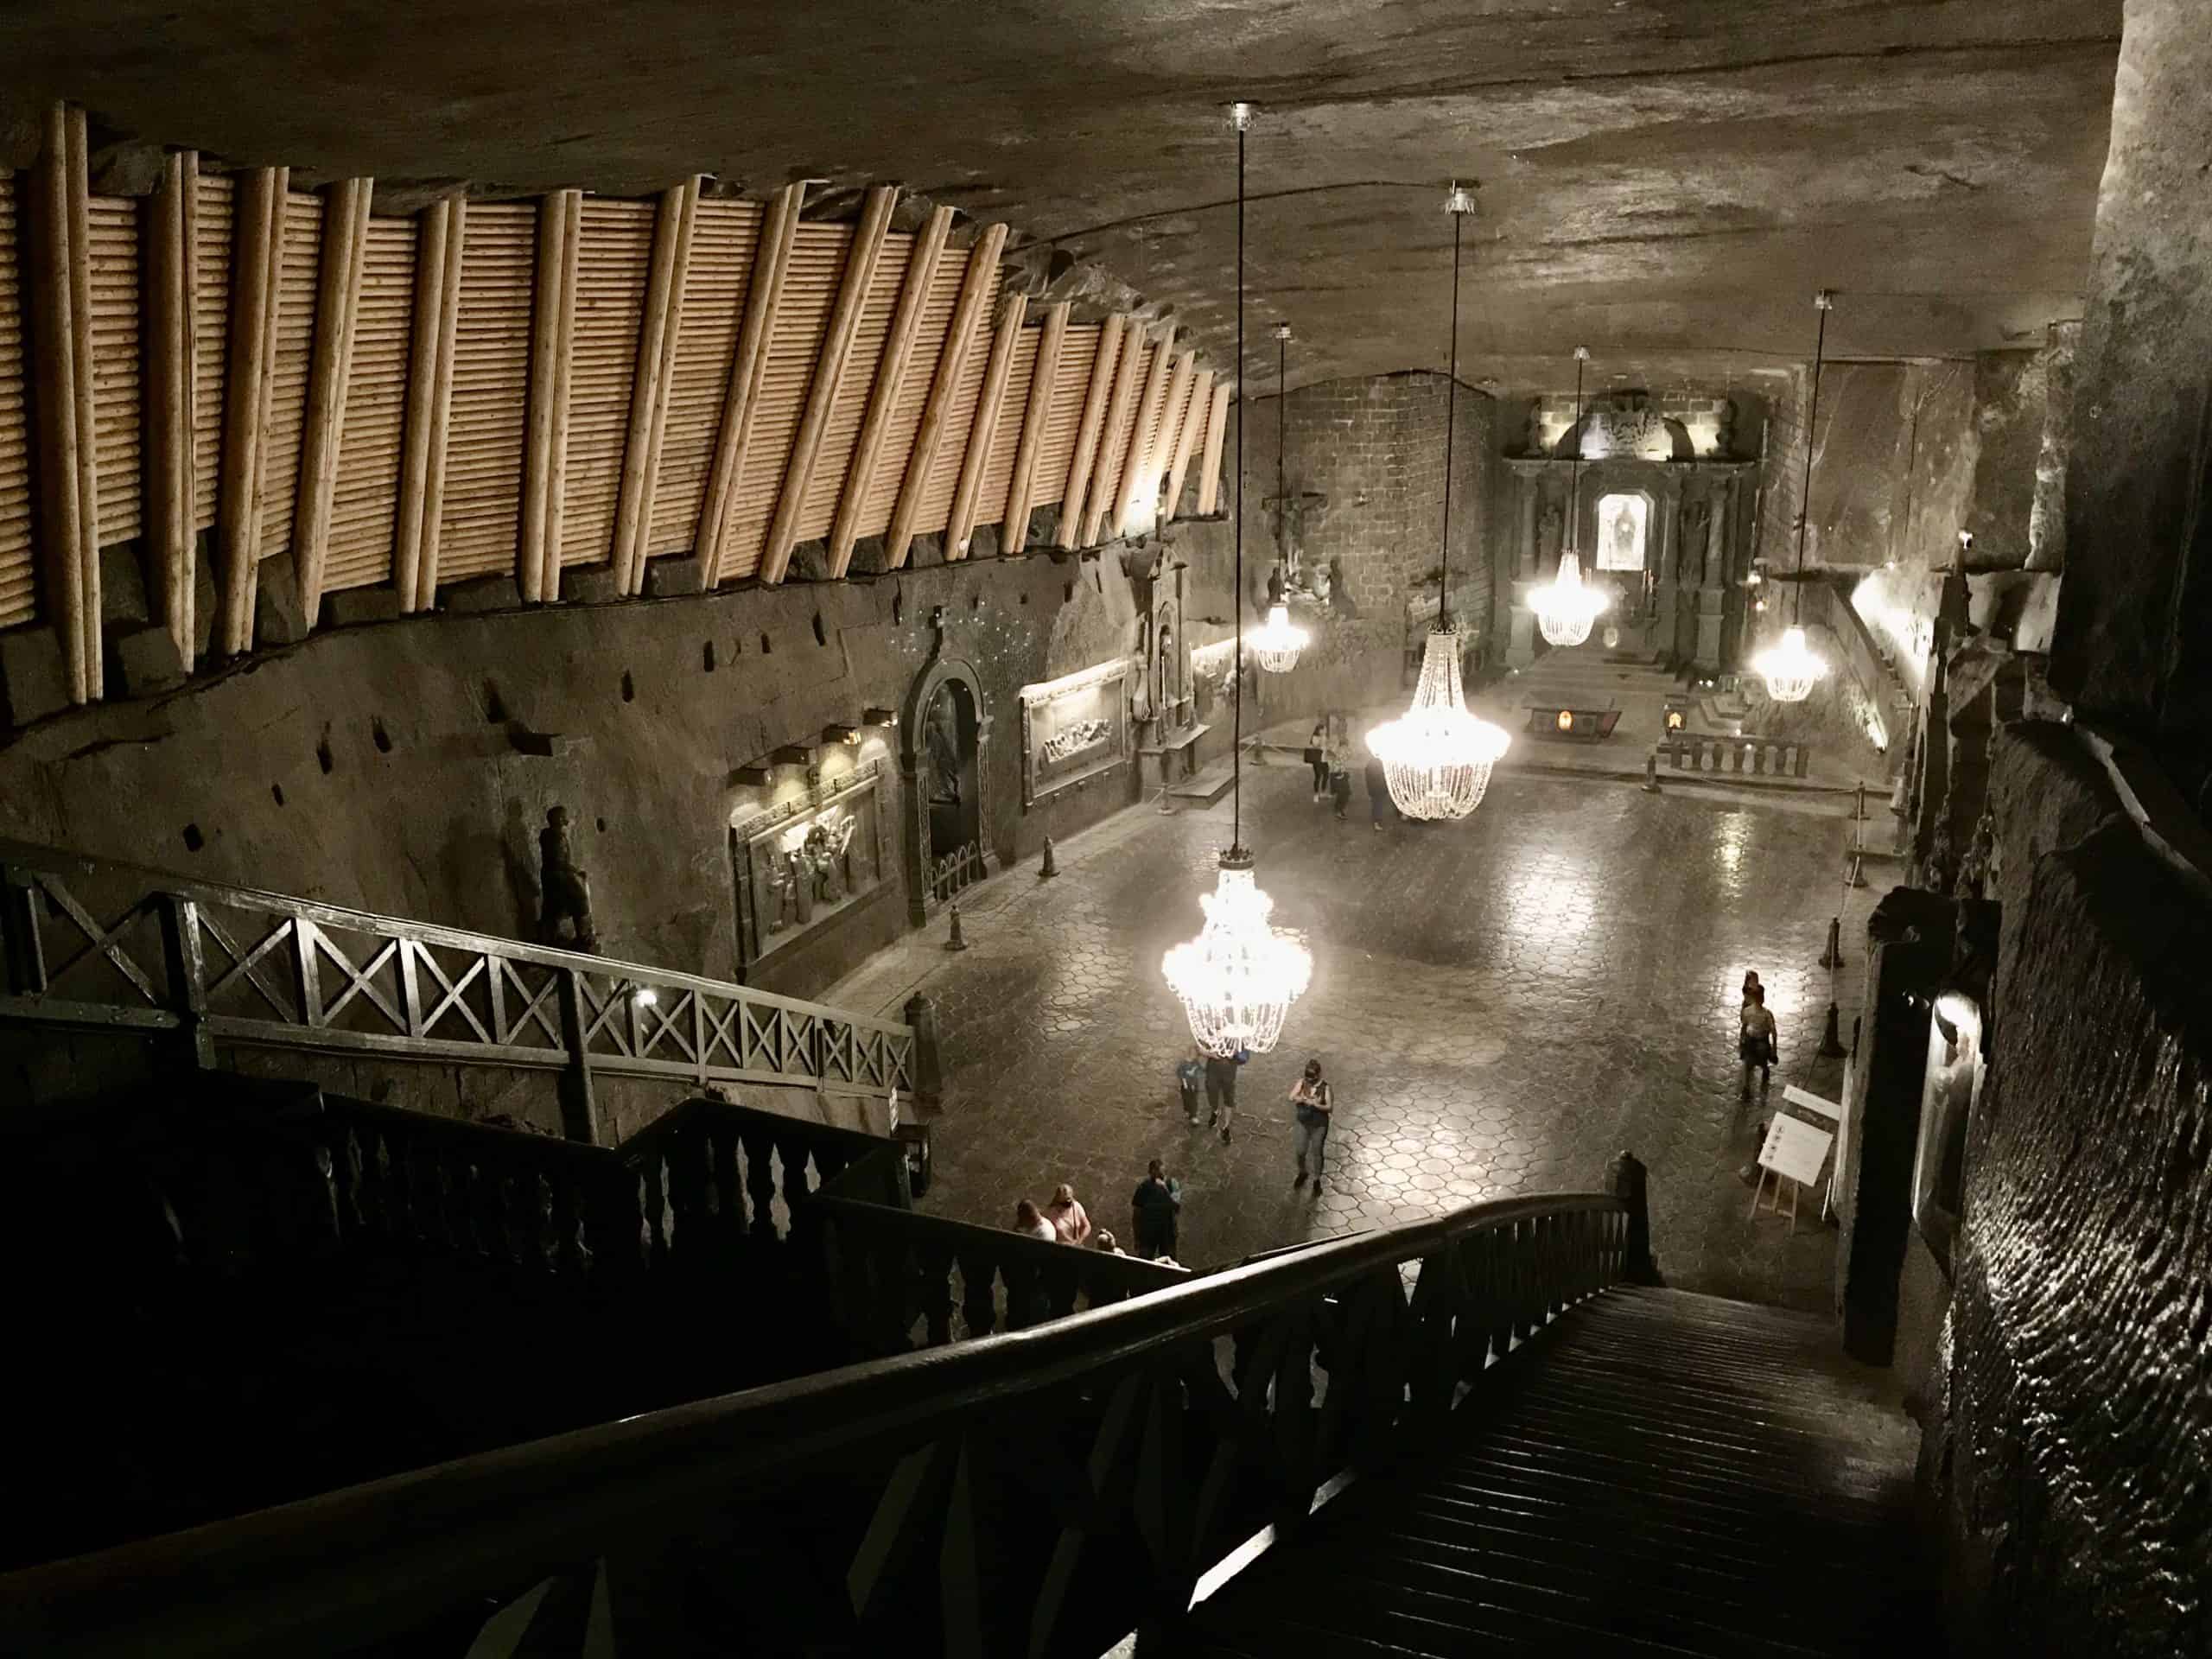 Wieliczka Salt Mines aren't far from Krakow and is a fantastic thing to do during your 3 days in Krakow